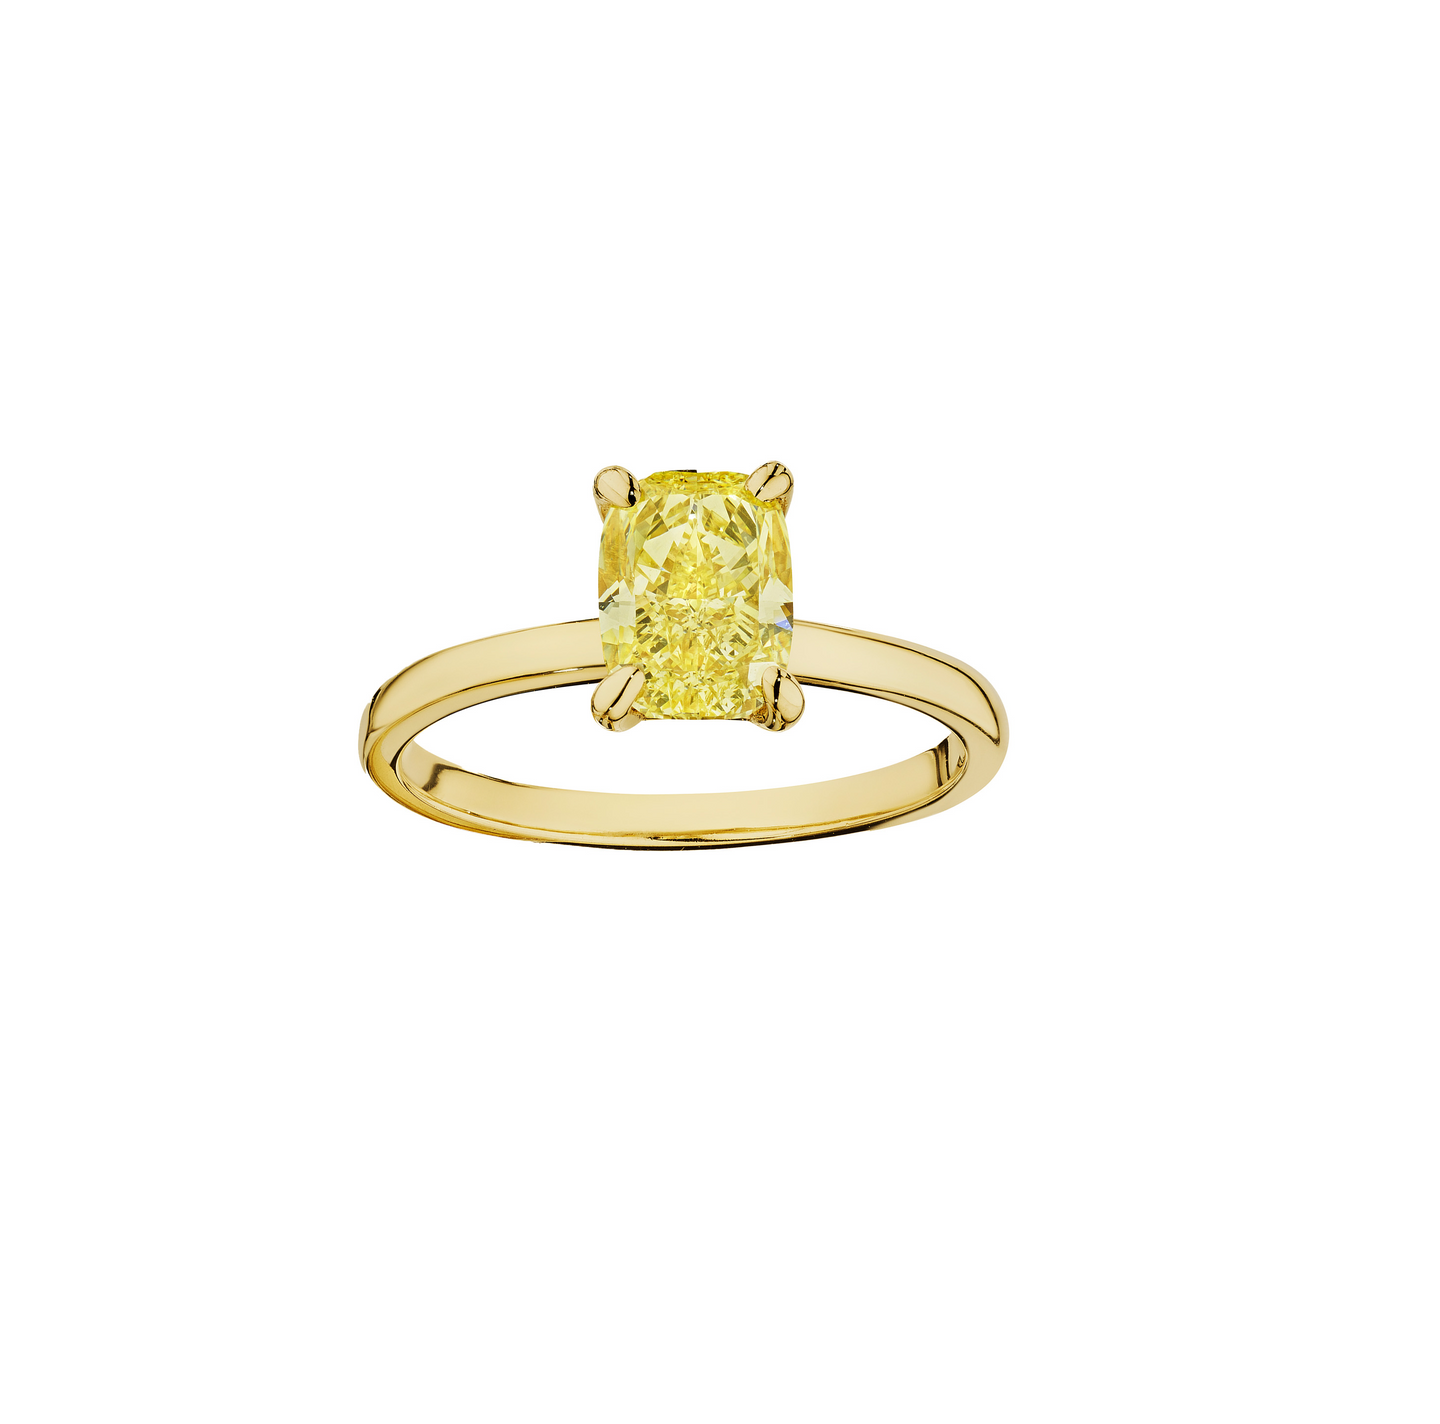 Fink's Exclusive Yellow Gold Solitaire Cushion Fancy Yellow Diamond Engagement Ring